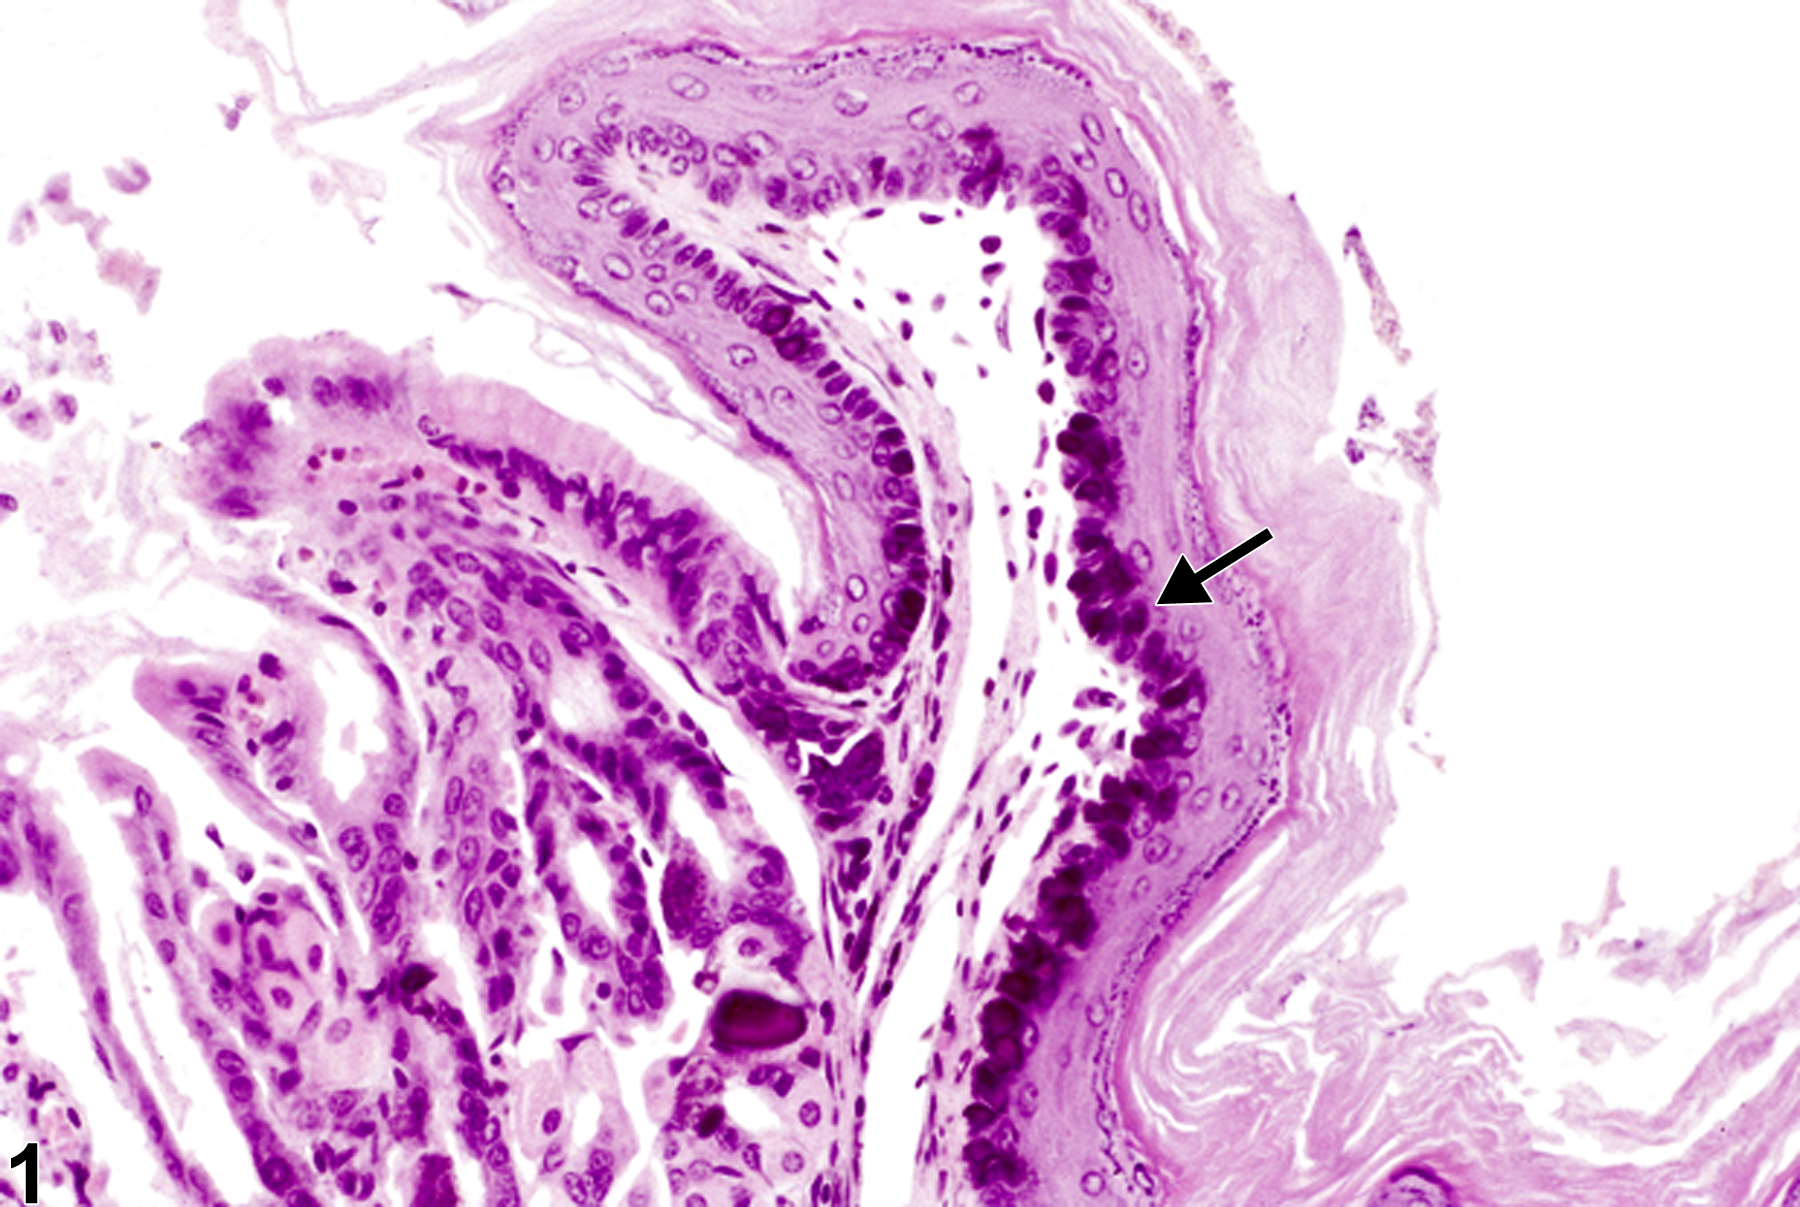 Image of mineralization in the forestomach from a male B6C3F1 mouse in a chronic study